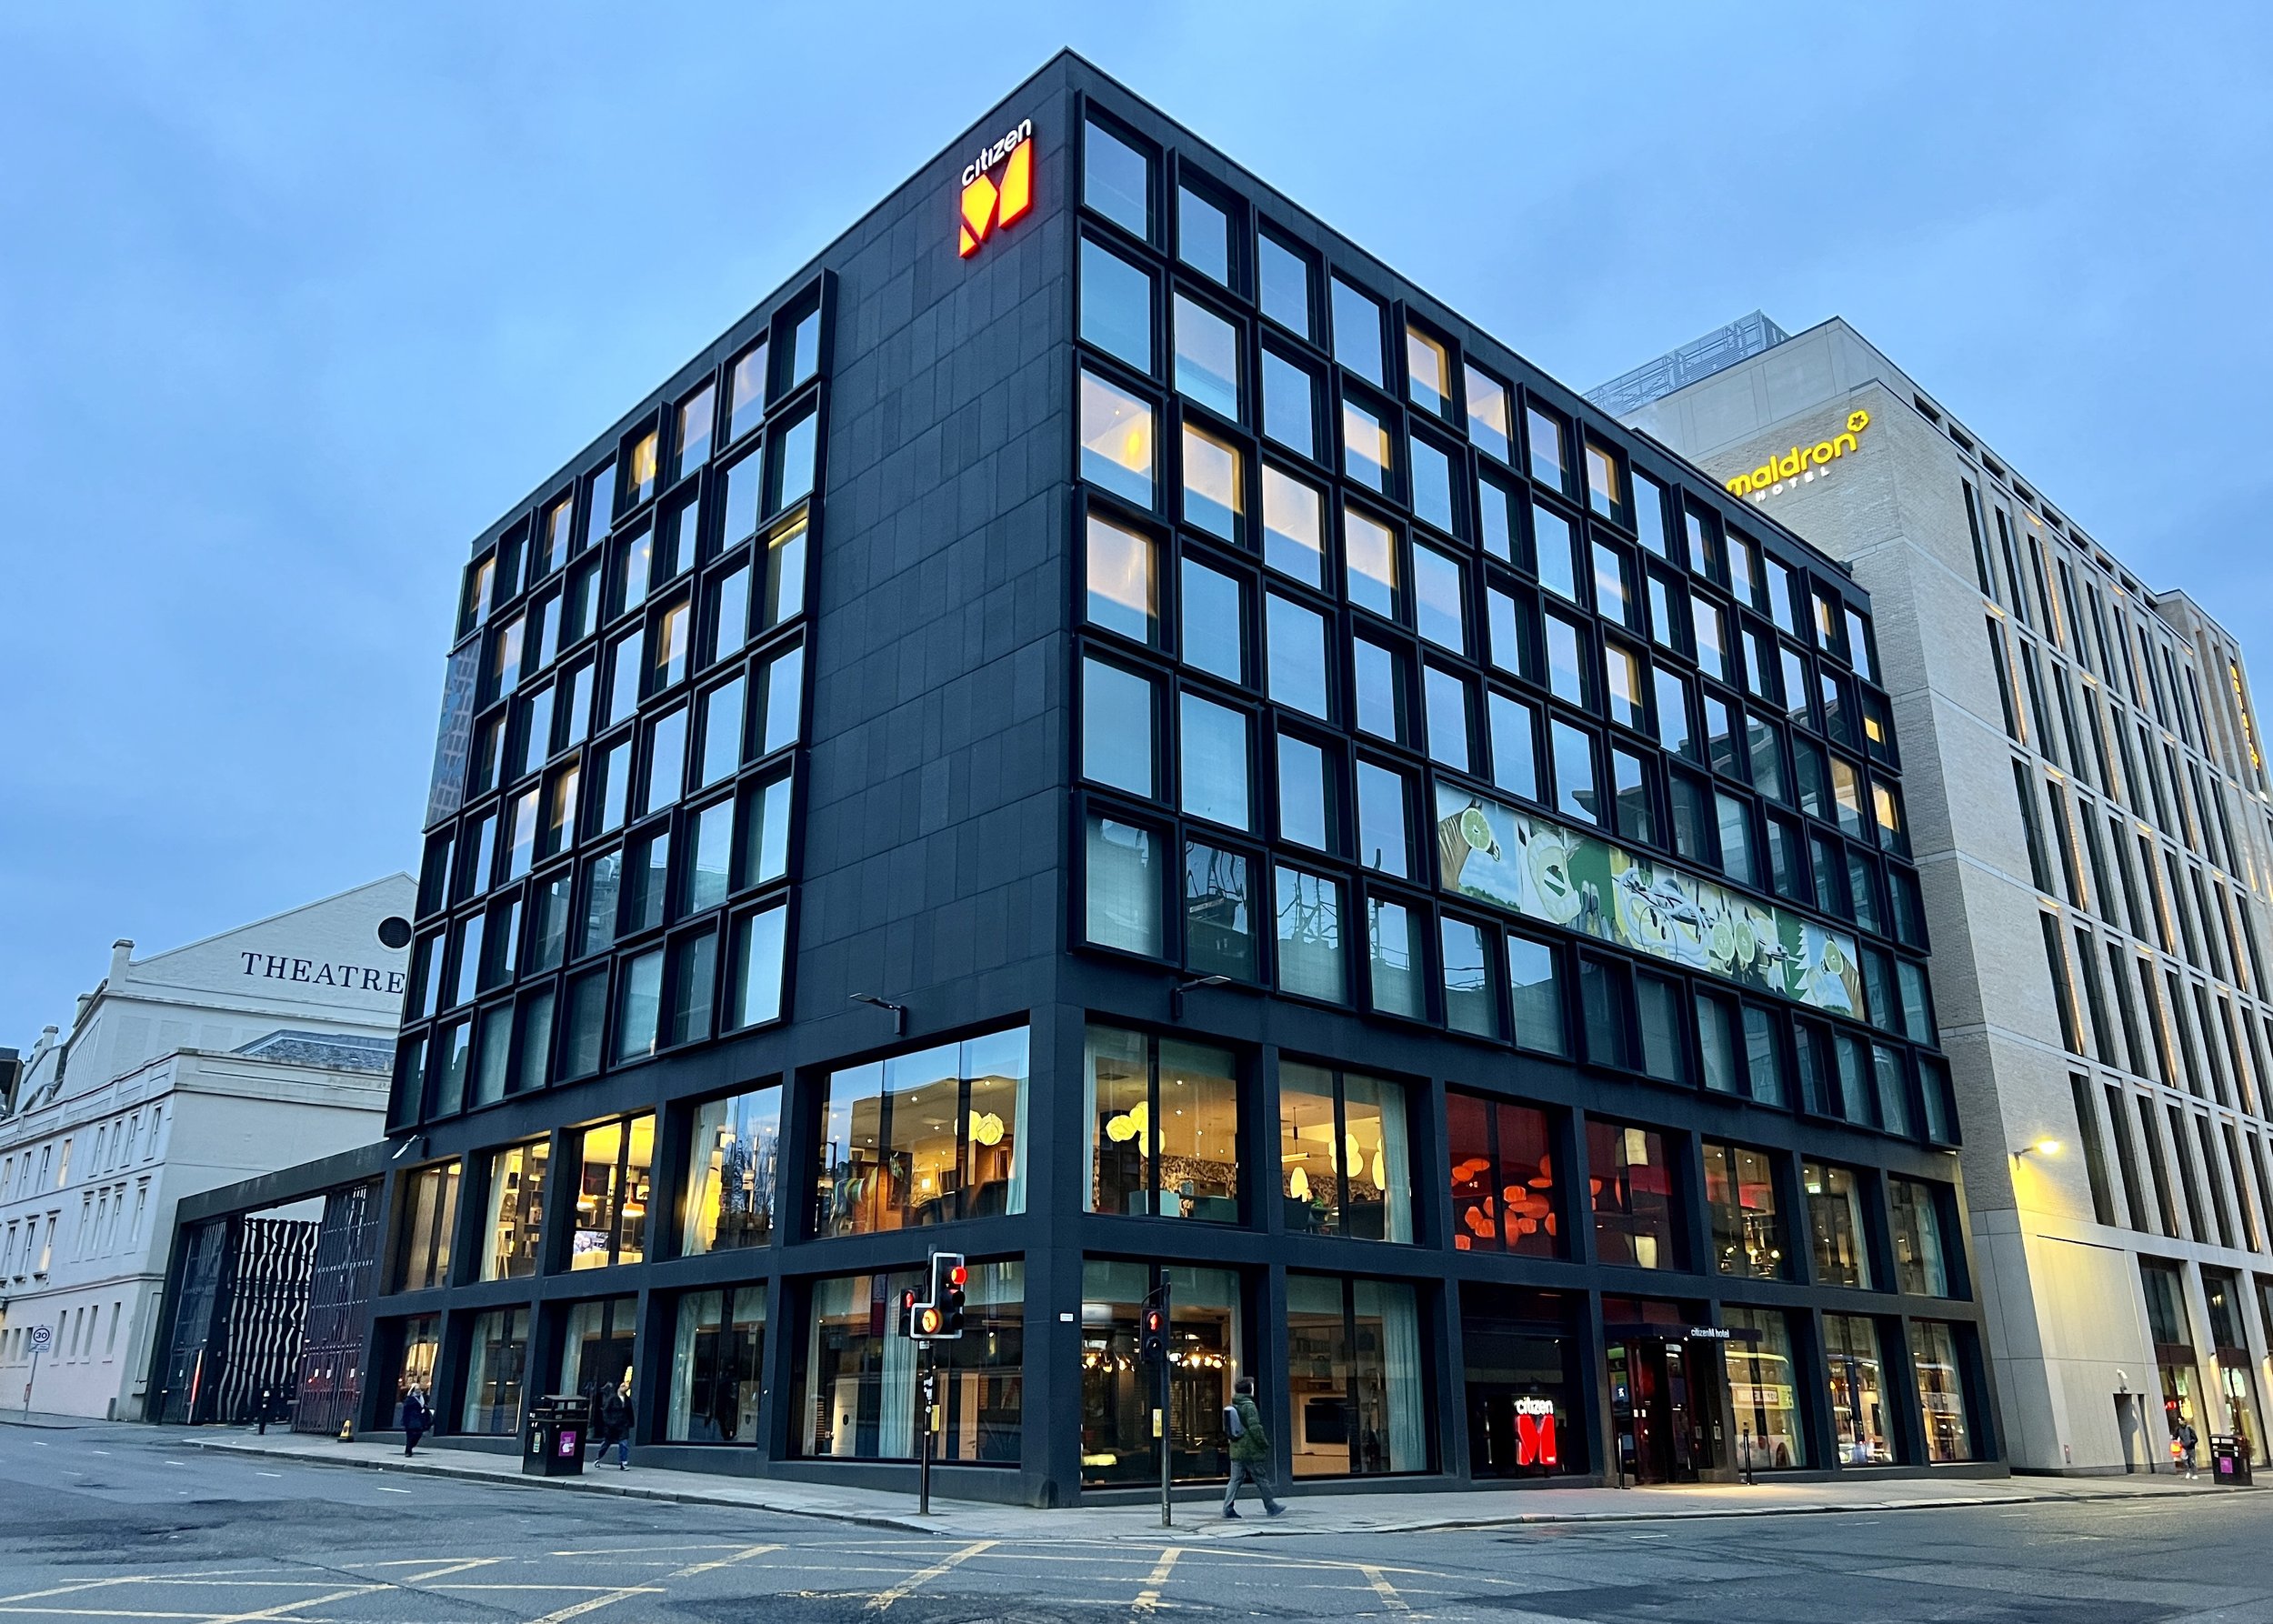 The citizenM Glasgow hotel is in the heart of the city